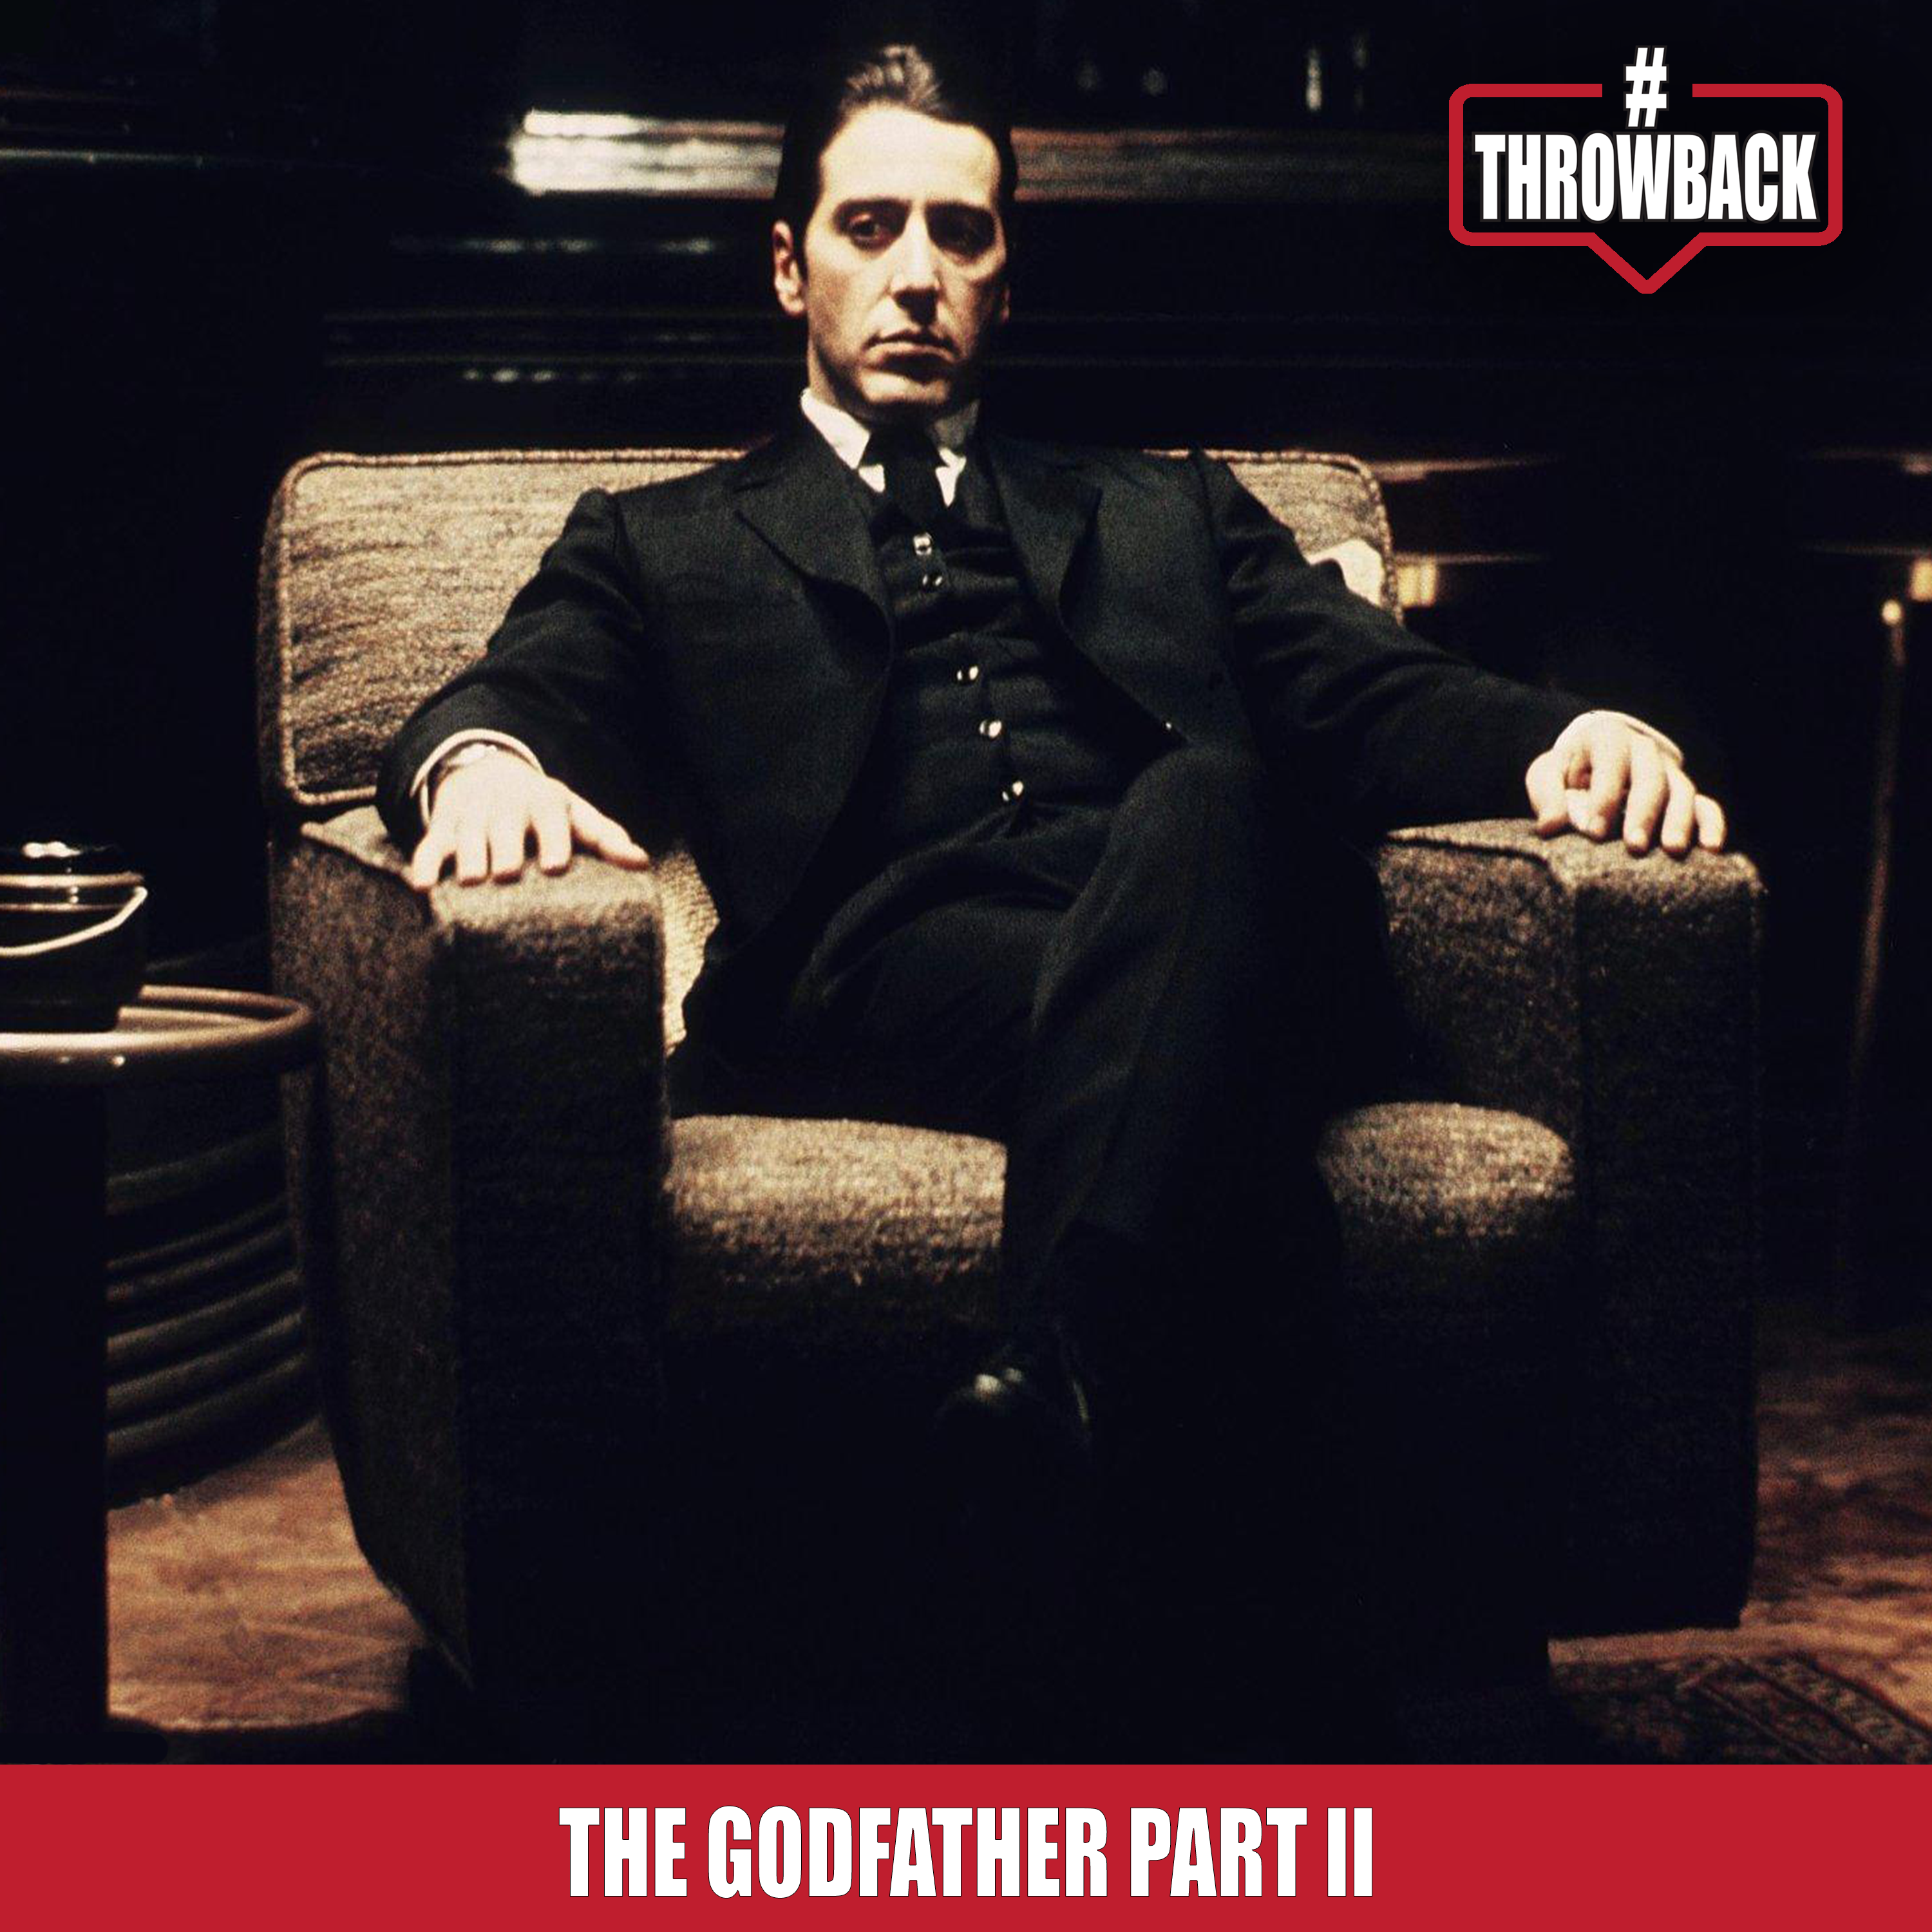 Throwback #90 – The Godfather Part II